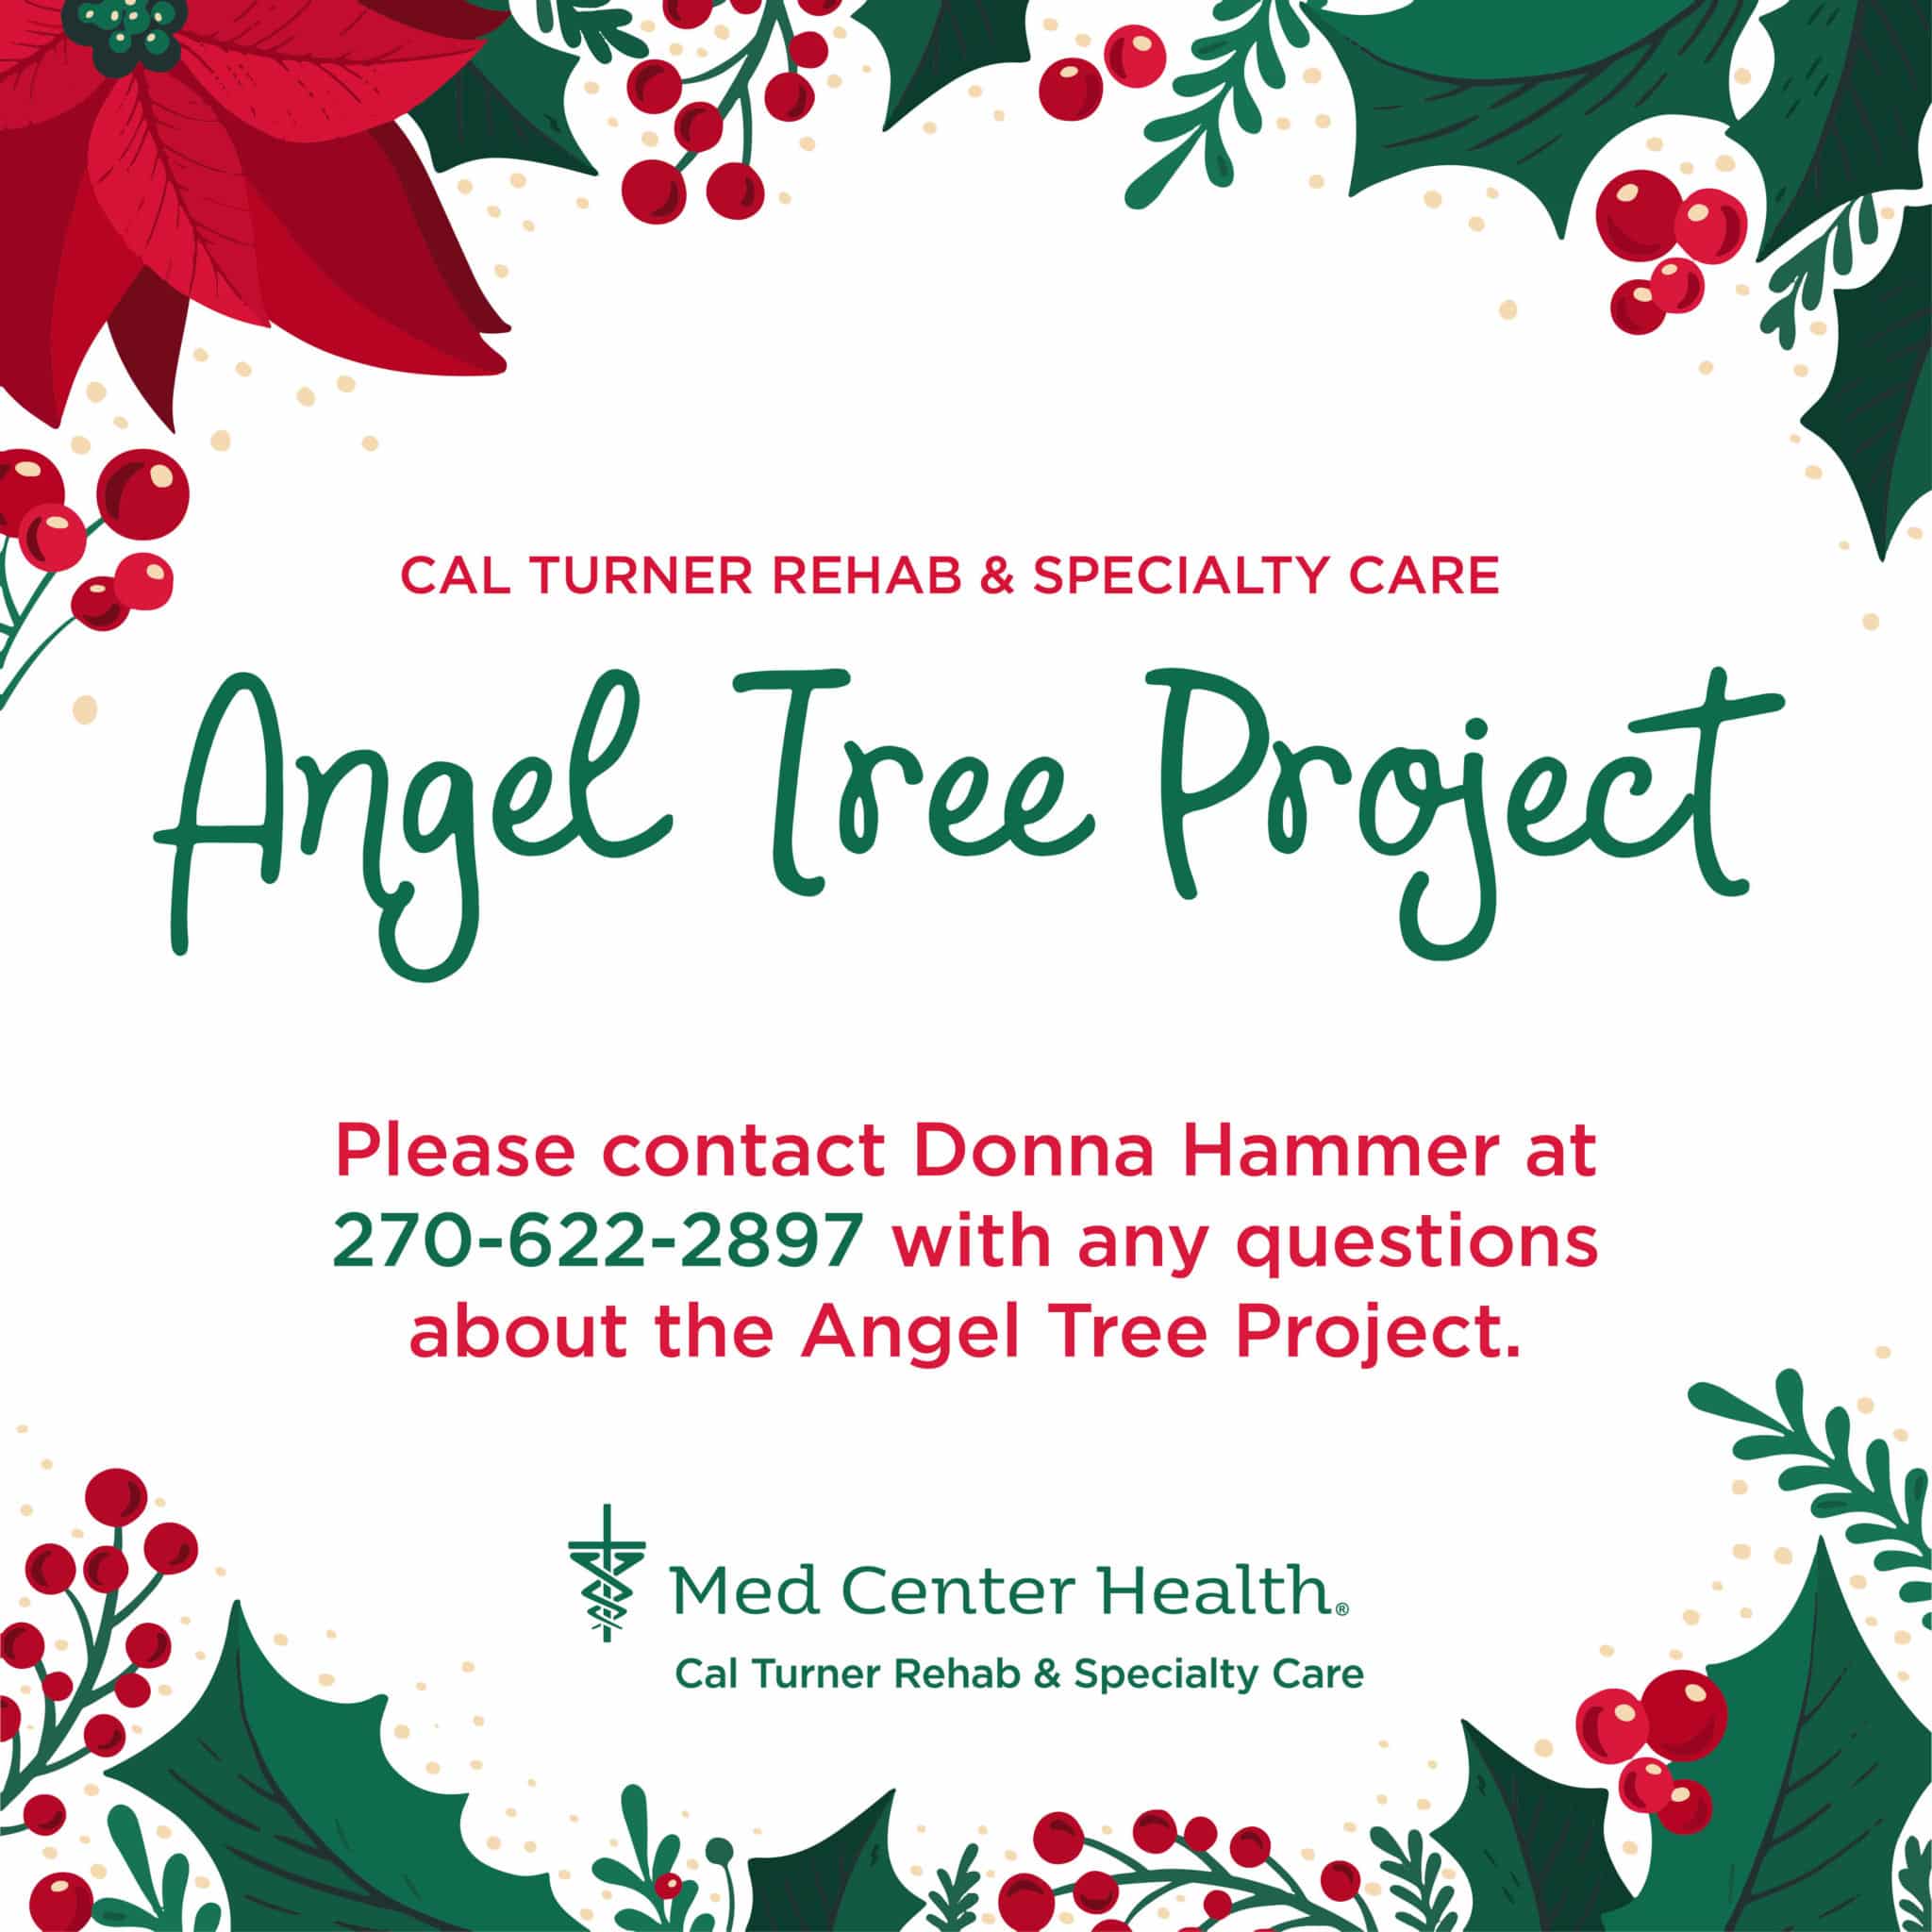 Cal Turner Rehab & Specialty Care Angel Tree